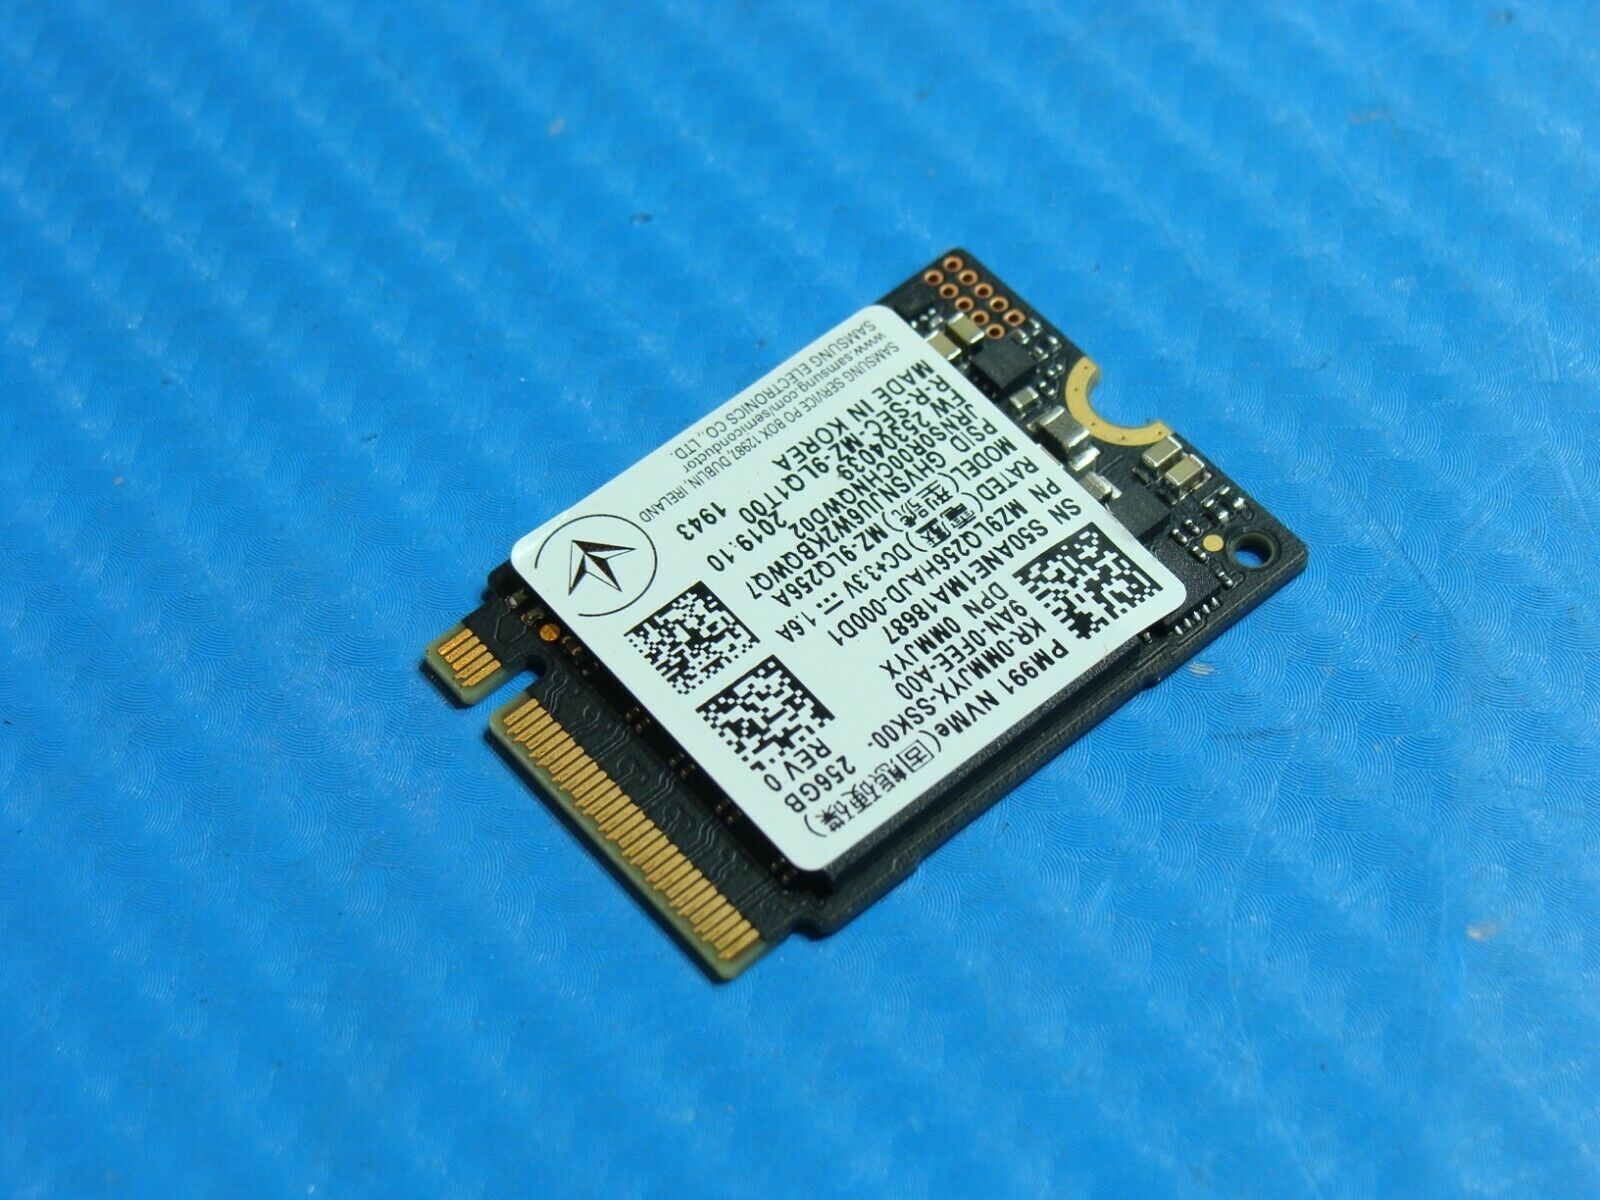 Dell 7390 Samsung Pm991 256gb Nvme M 2 Ssd Solid State Drive Stick Mz Tested Laptop Parts Replacement Parts For Repairs